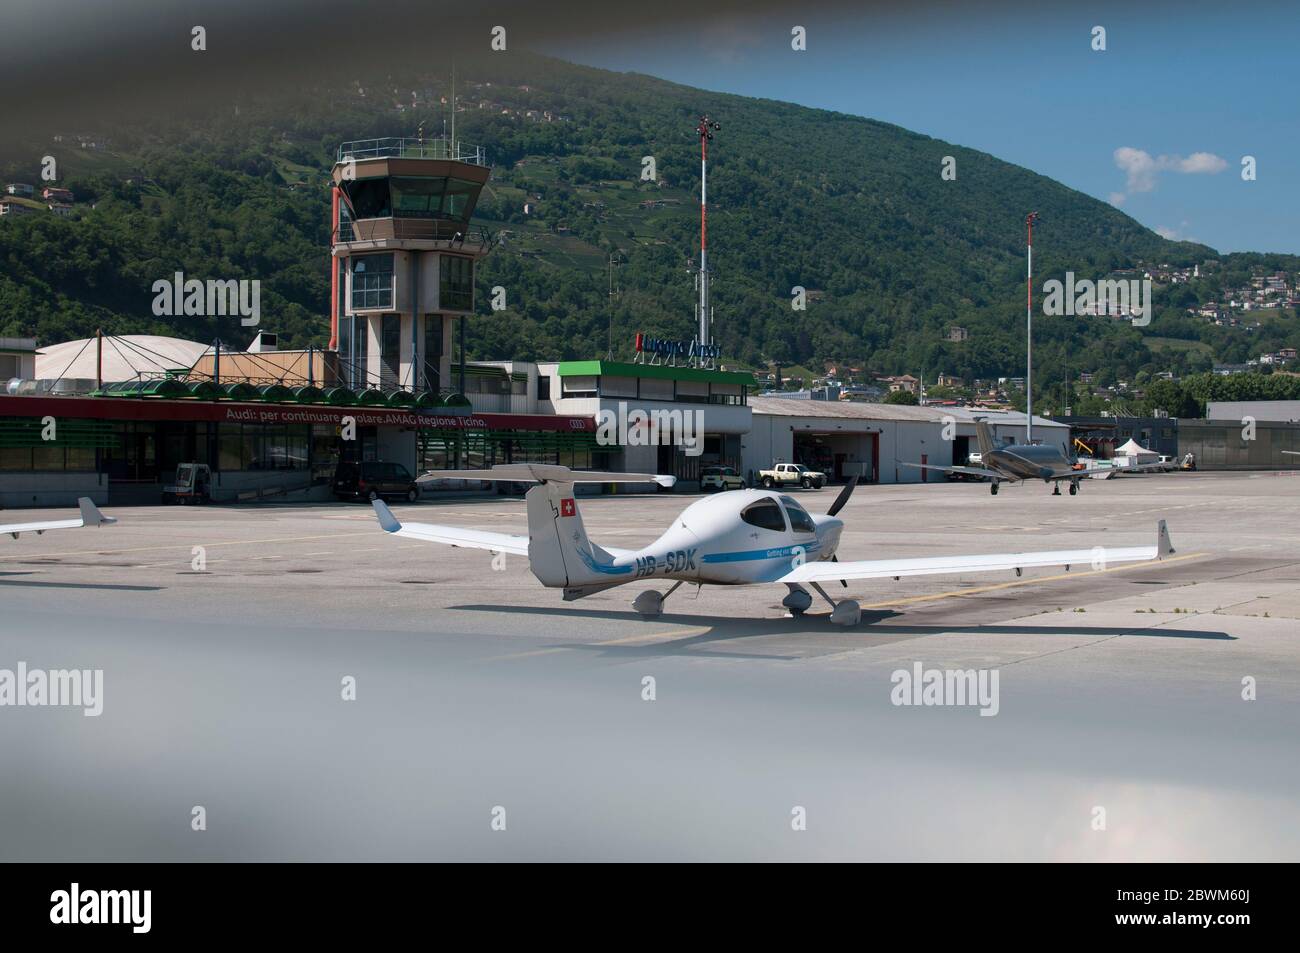 Agno, Ticino, Switzerland - 21st May 2020 : View through the gate of the Lugano-Agno airport in Switzerland with a small airplane parked in front of i Stock Photo